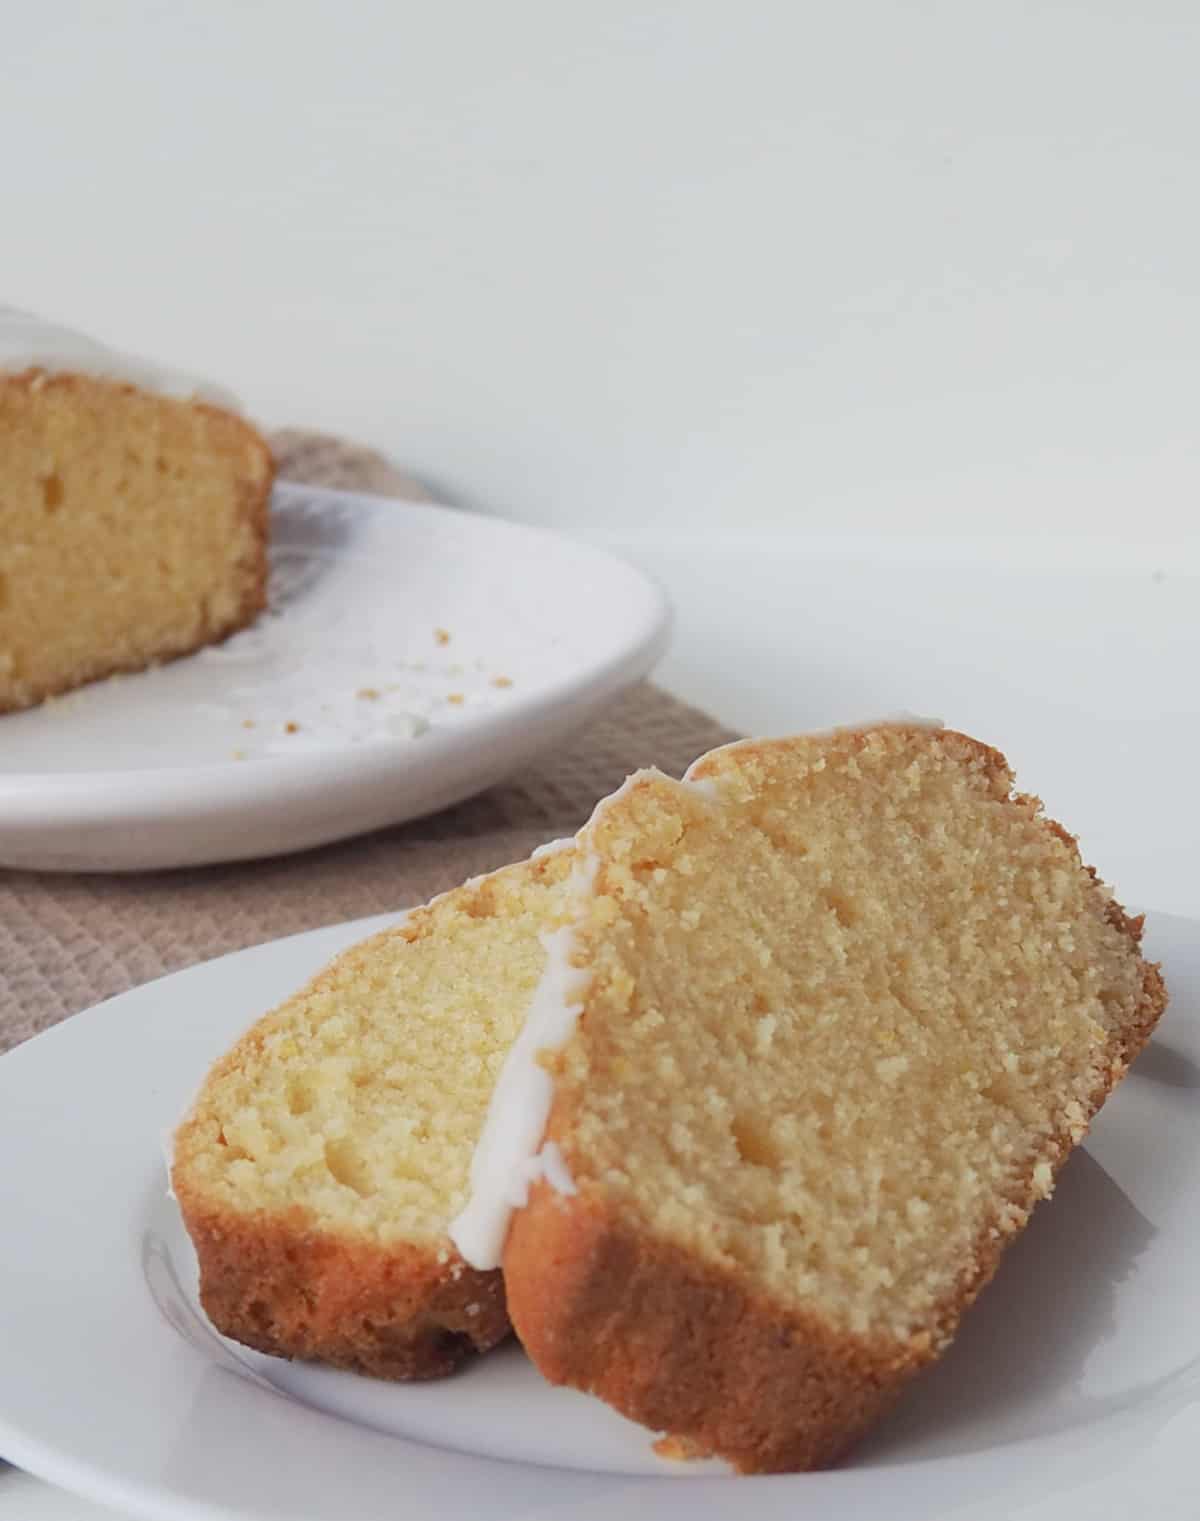 Side view of Two slices of Orange butter cake on a white plate. in the background is the rest of the cake on a white serving platter.